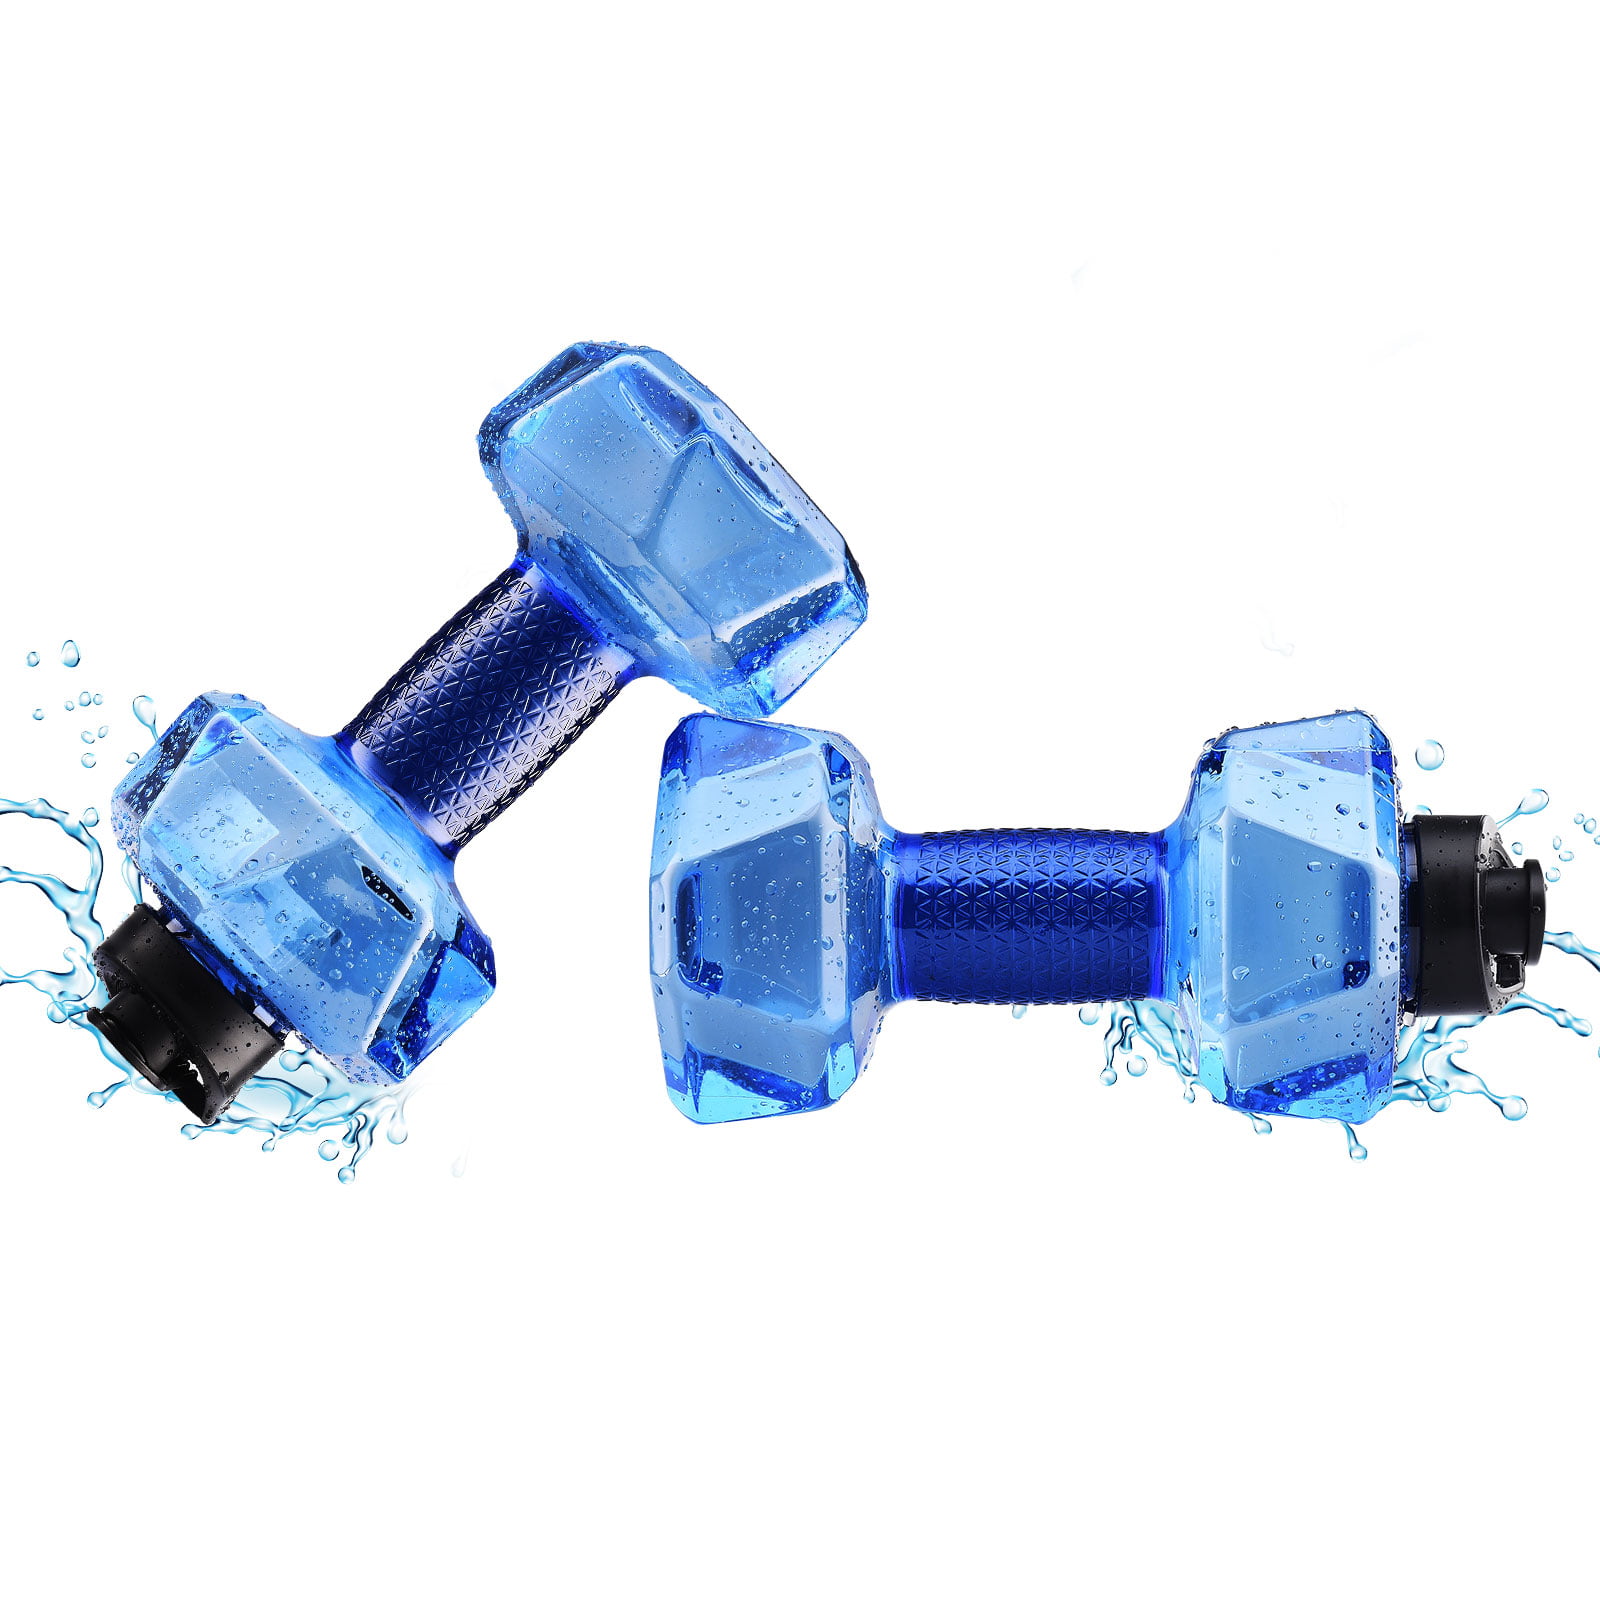 Fstcrt Water Weights for Pool Exercise Set，Aquatic Dumbbells 2PCS Water Aerobic Exercise PE Dumbbell Pool Resistance,Water Aqua Fitness Barbells Hand Bar Exercises Equipment for Weight Loss 